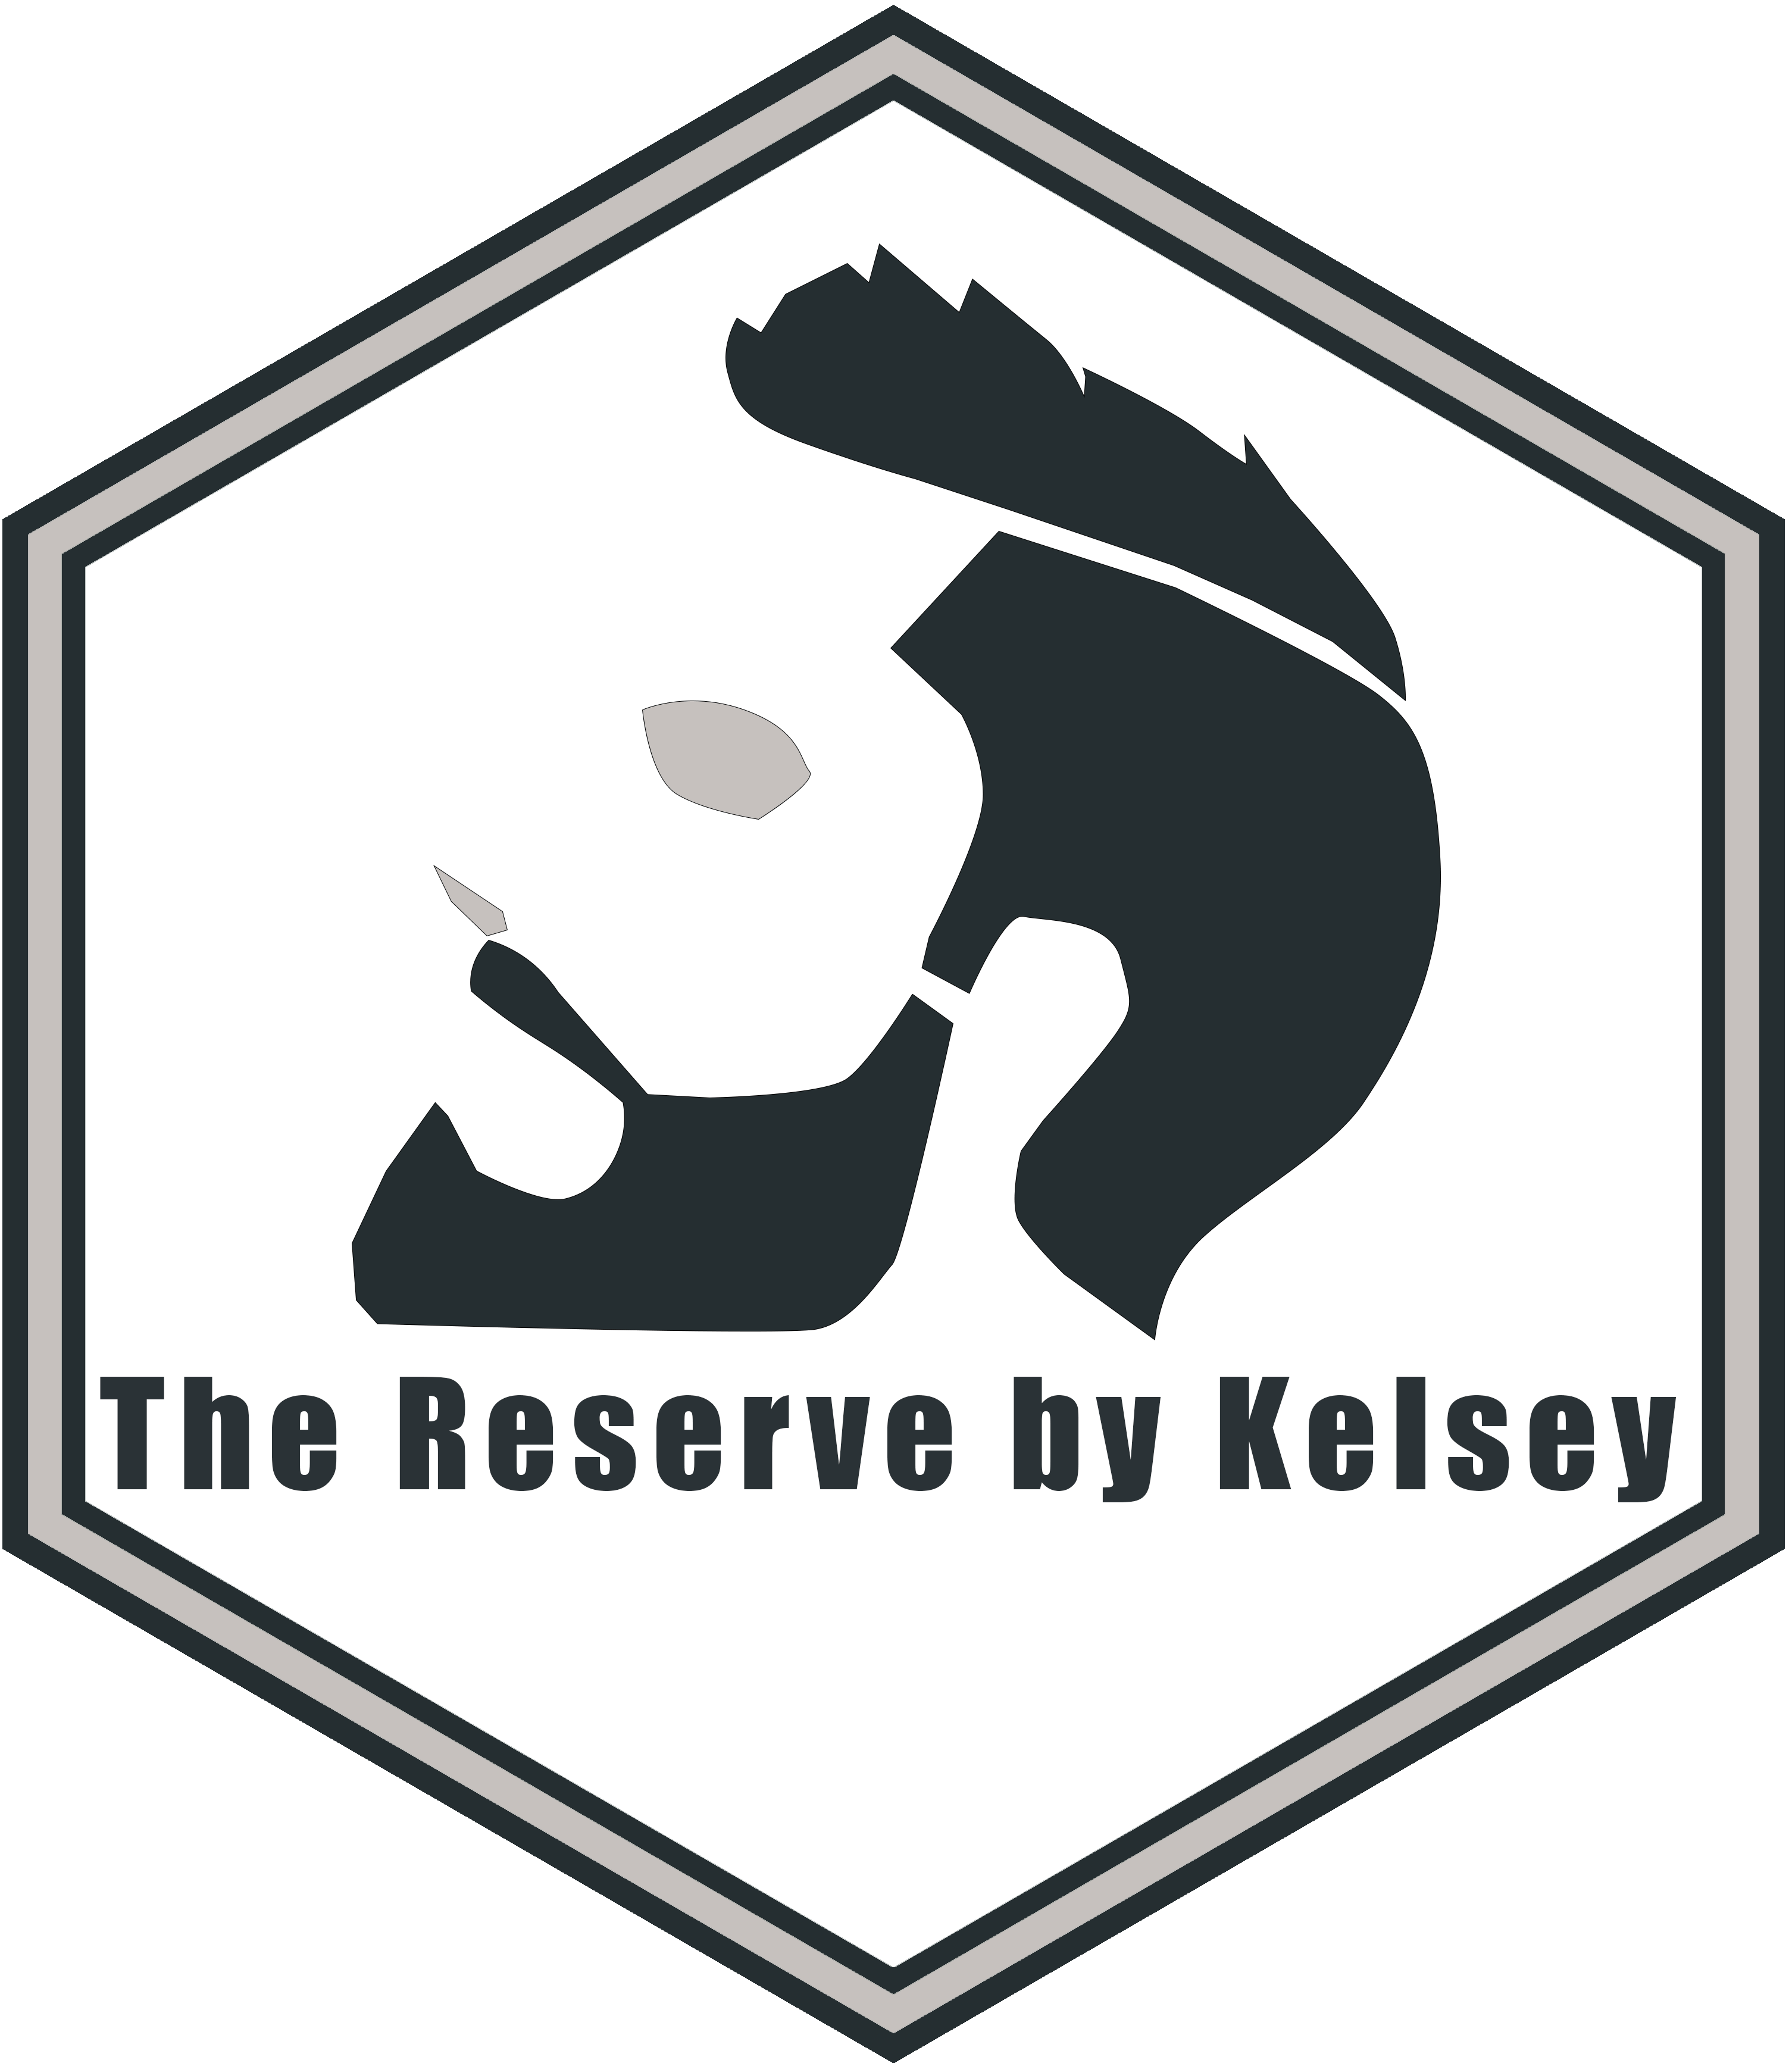 The Reserve by Kelsey